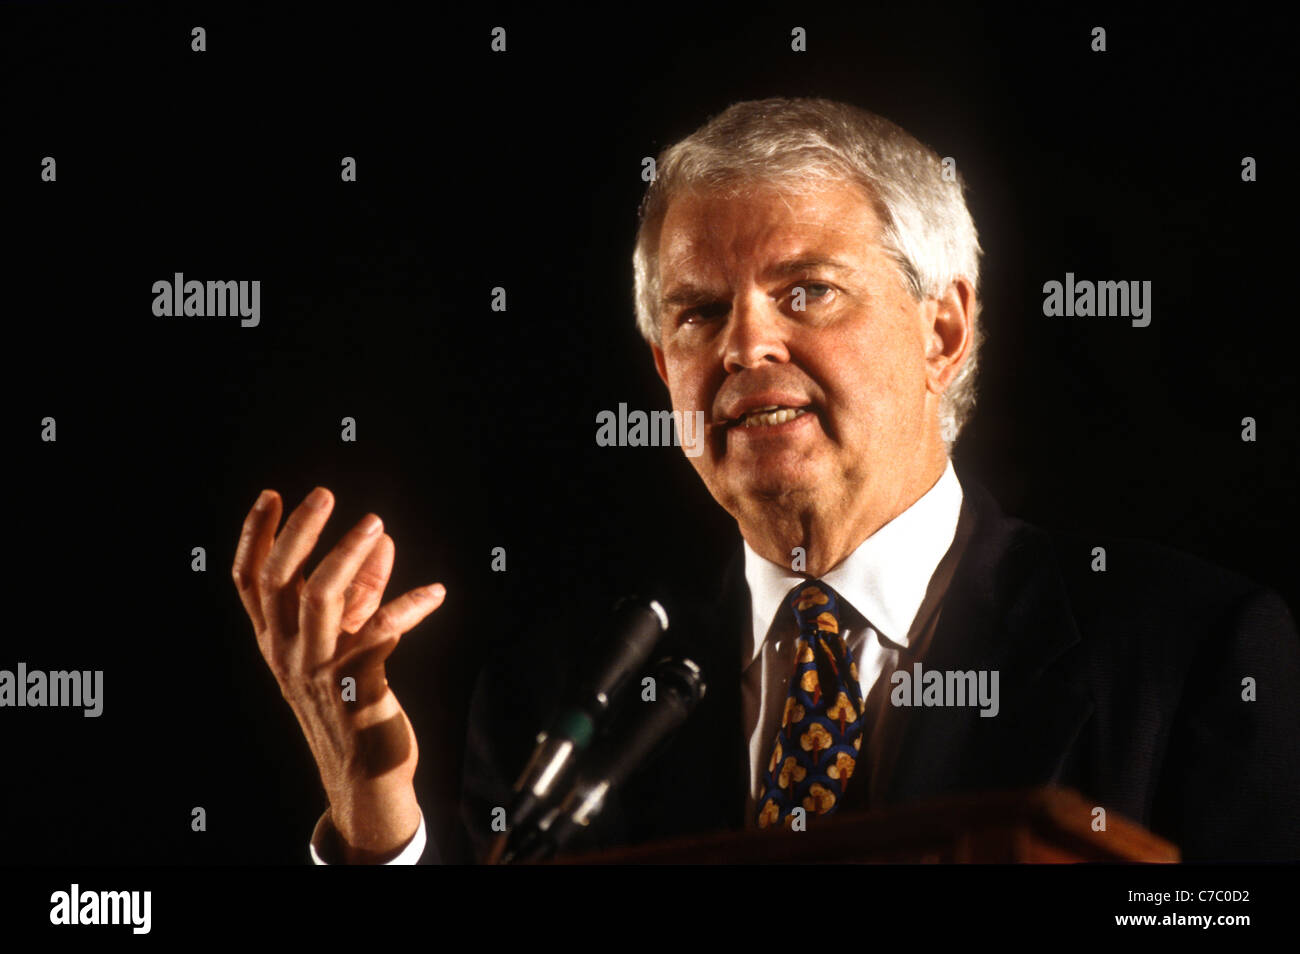 Gov. Richard Lamm addresses the Reform Party of Virginia convention July 20, 1996 in Charlottesville, VA. Stock Photo